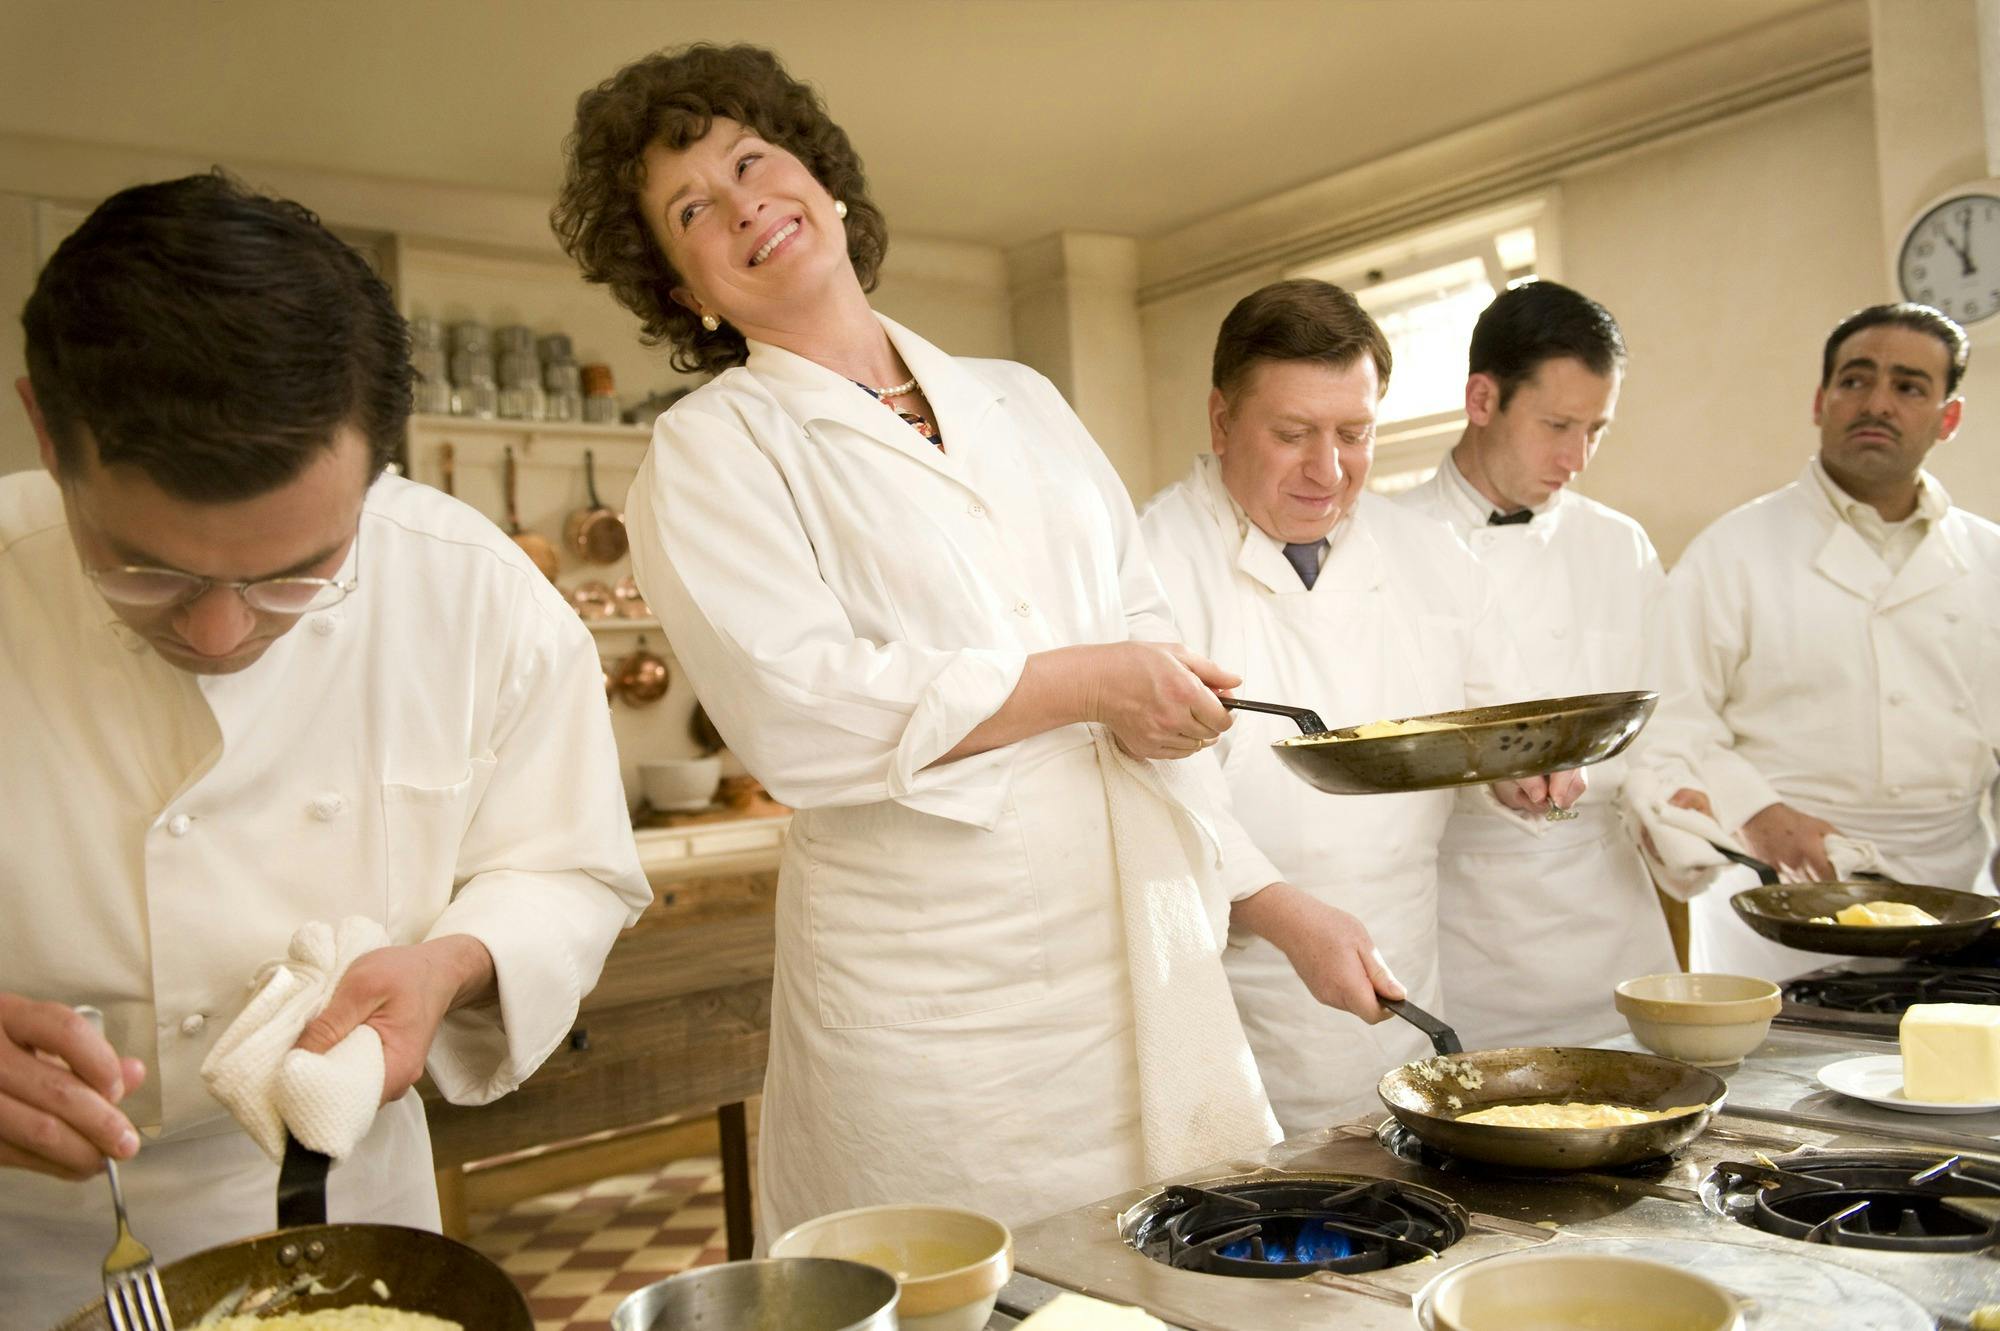 Meryl Streep was nominated for an Oscar for her portrayal of Julia Child in 